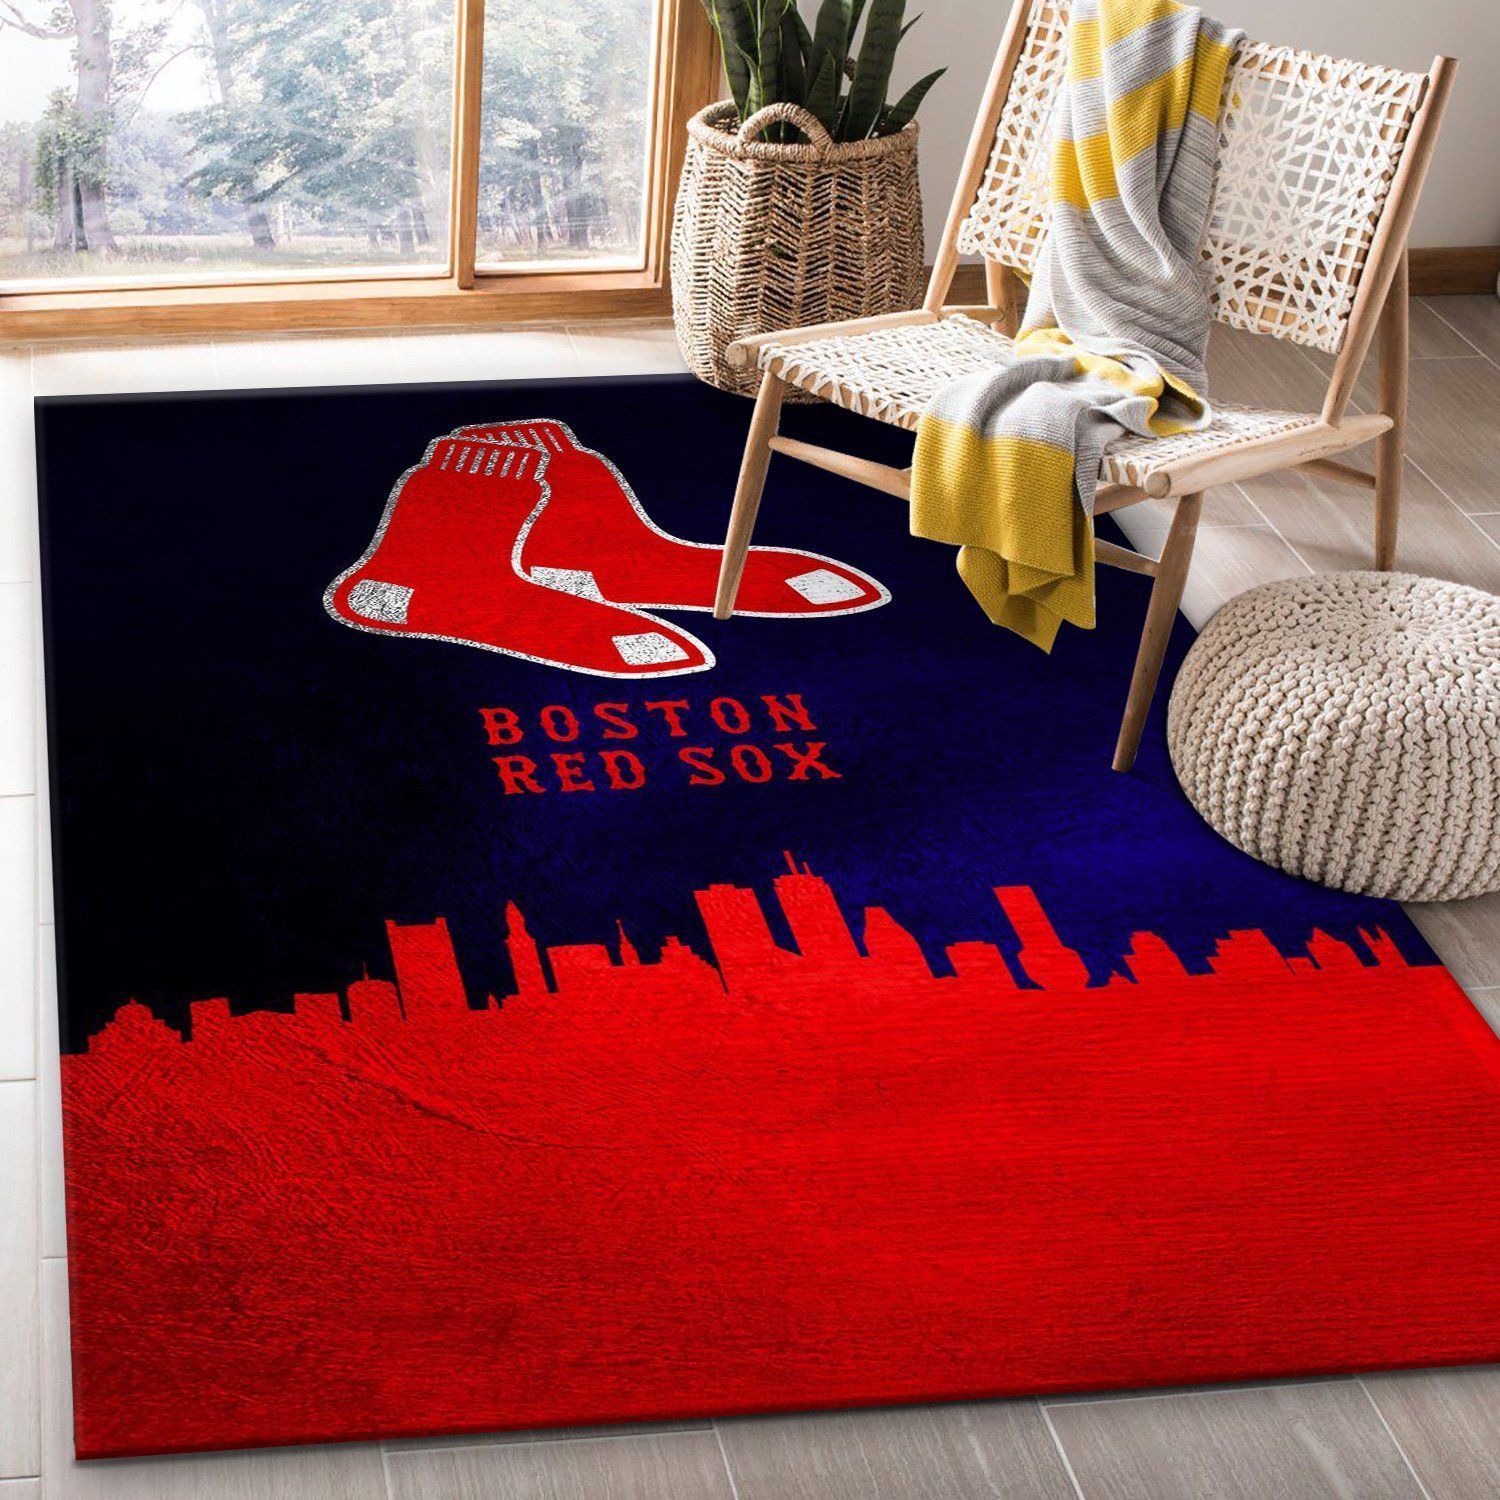 Boston Red Sox Skyline Area Rug For Christmas, Bedroom, Home US Decor - Indoor Outdoor Rugs 1